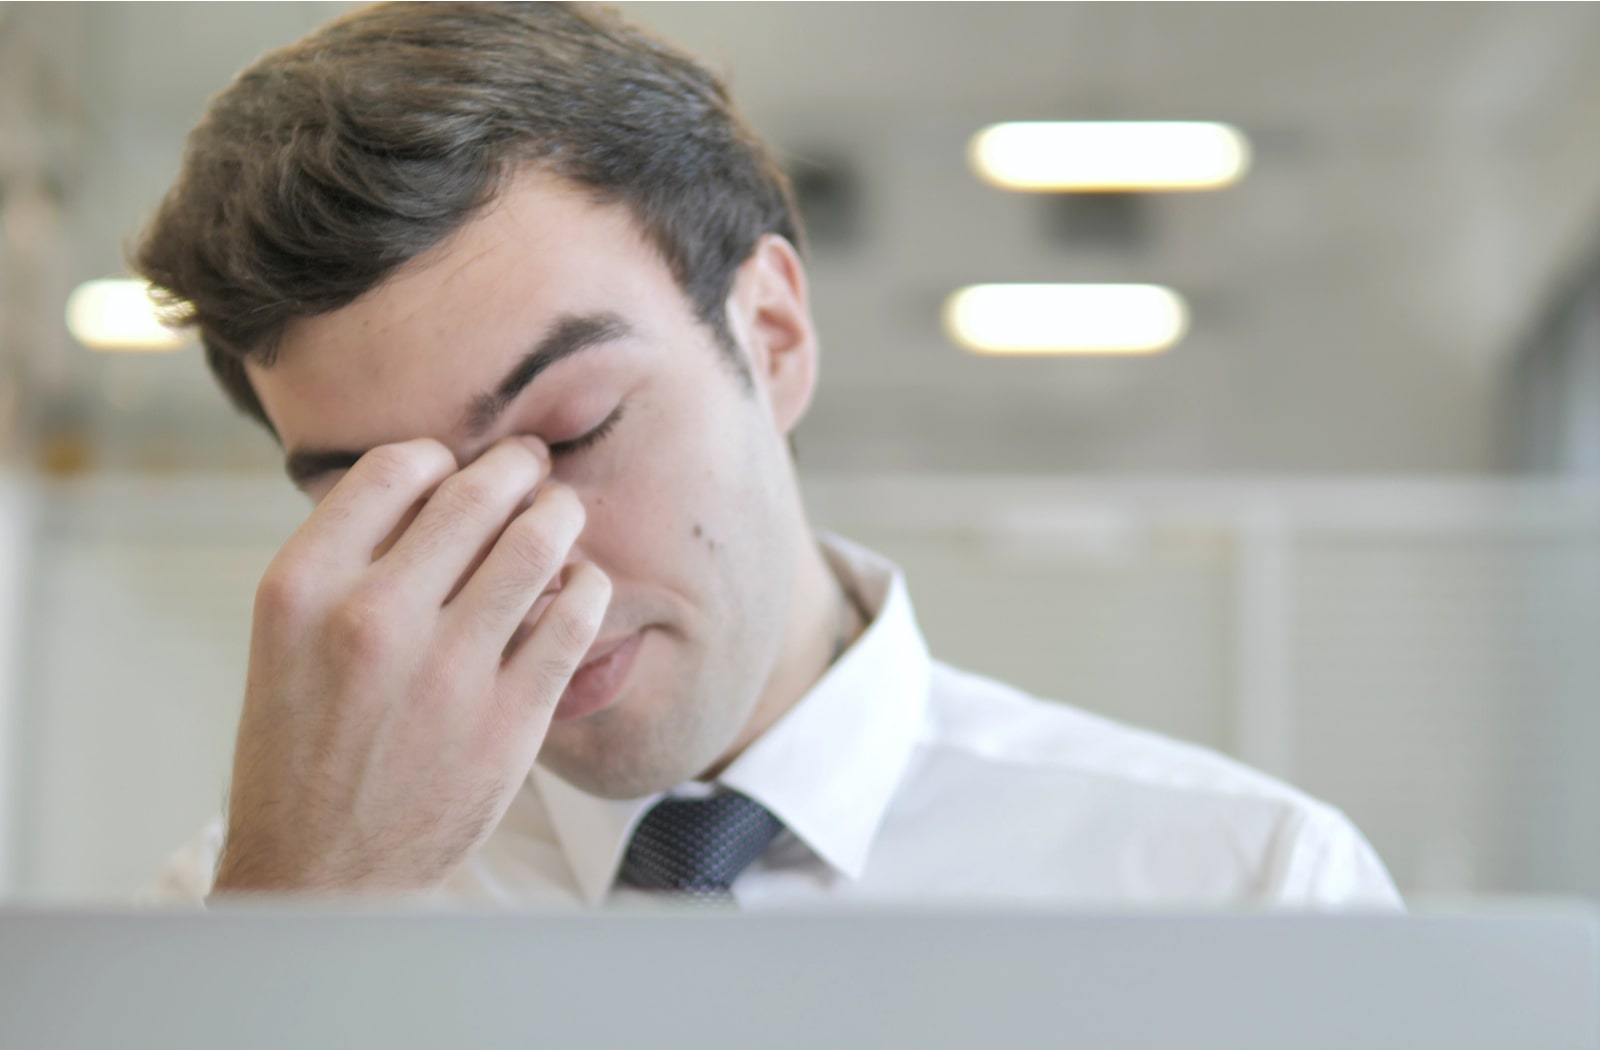 A young man at his desk with his eyes close and hand over his eyes due to digital eye strain